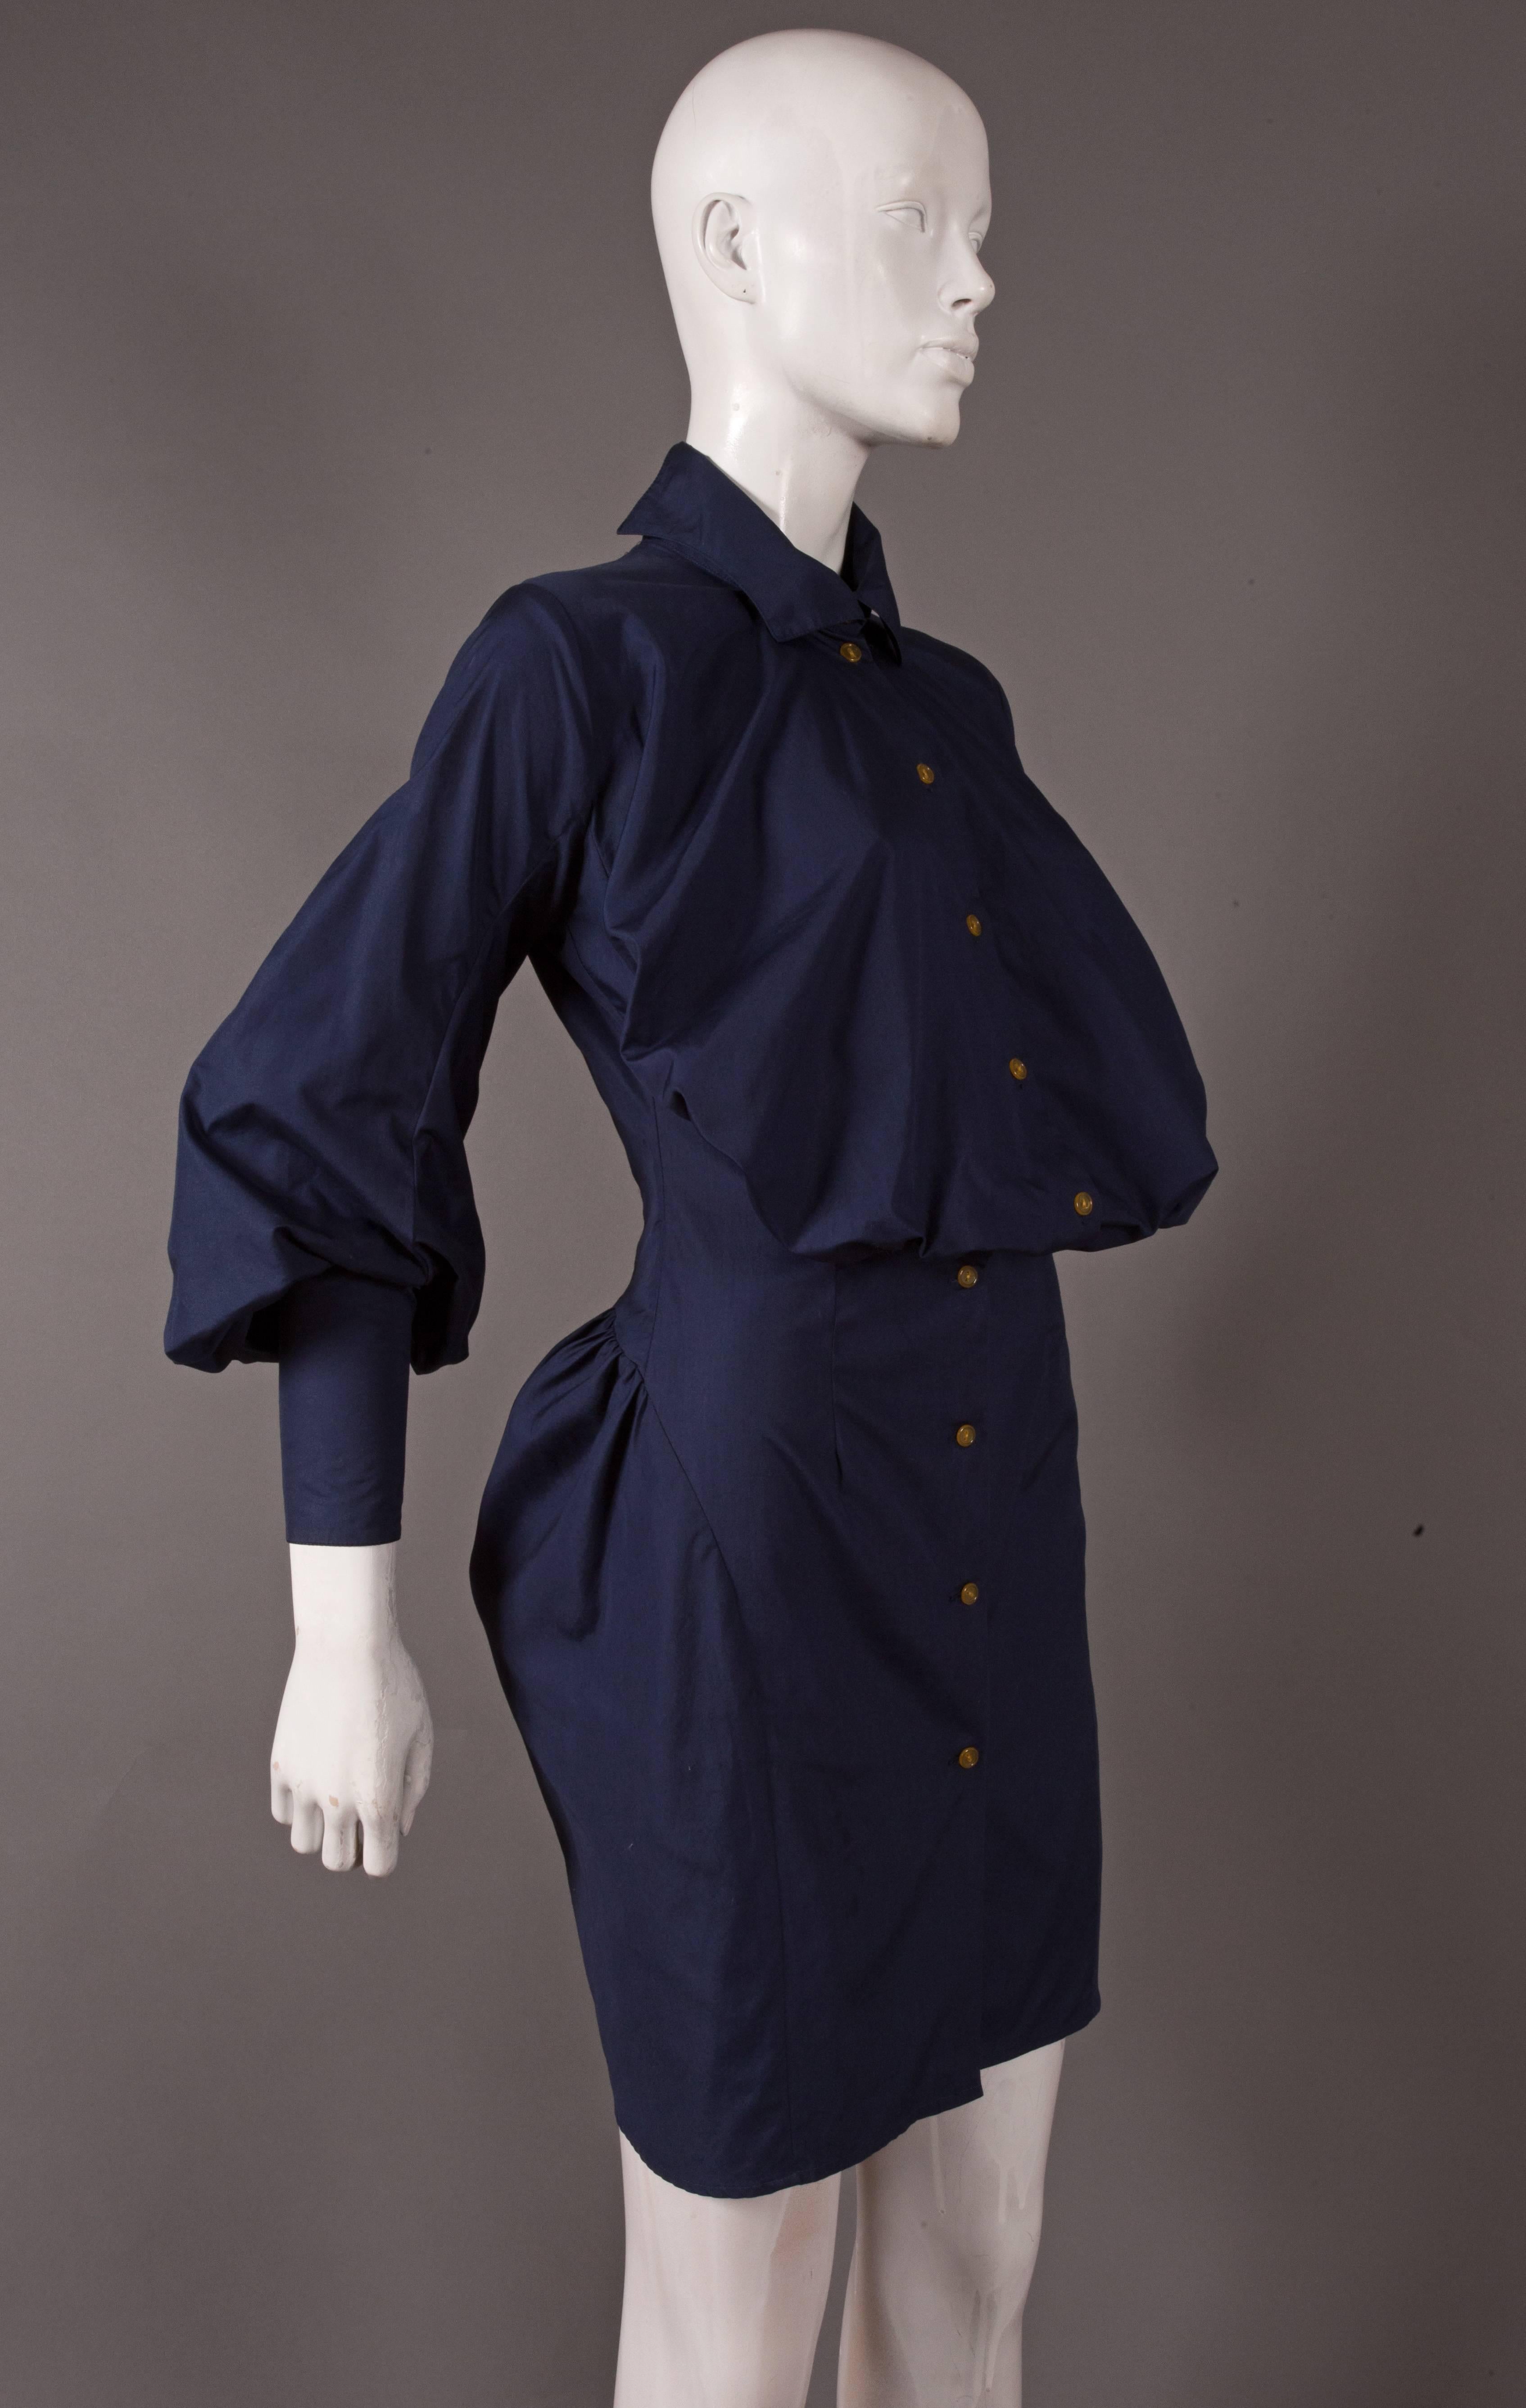 Vivienne Westwood navy cotton shirt dress, circa 1990s. The dress features a balloon like chest, high neck collar, bishop sleeves and a bustle.

